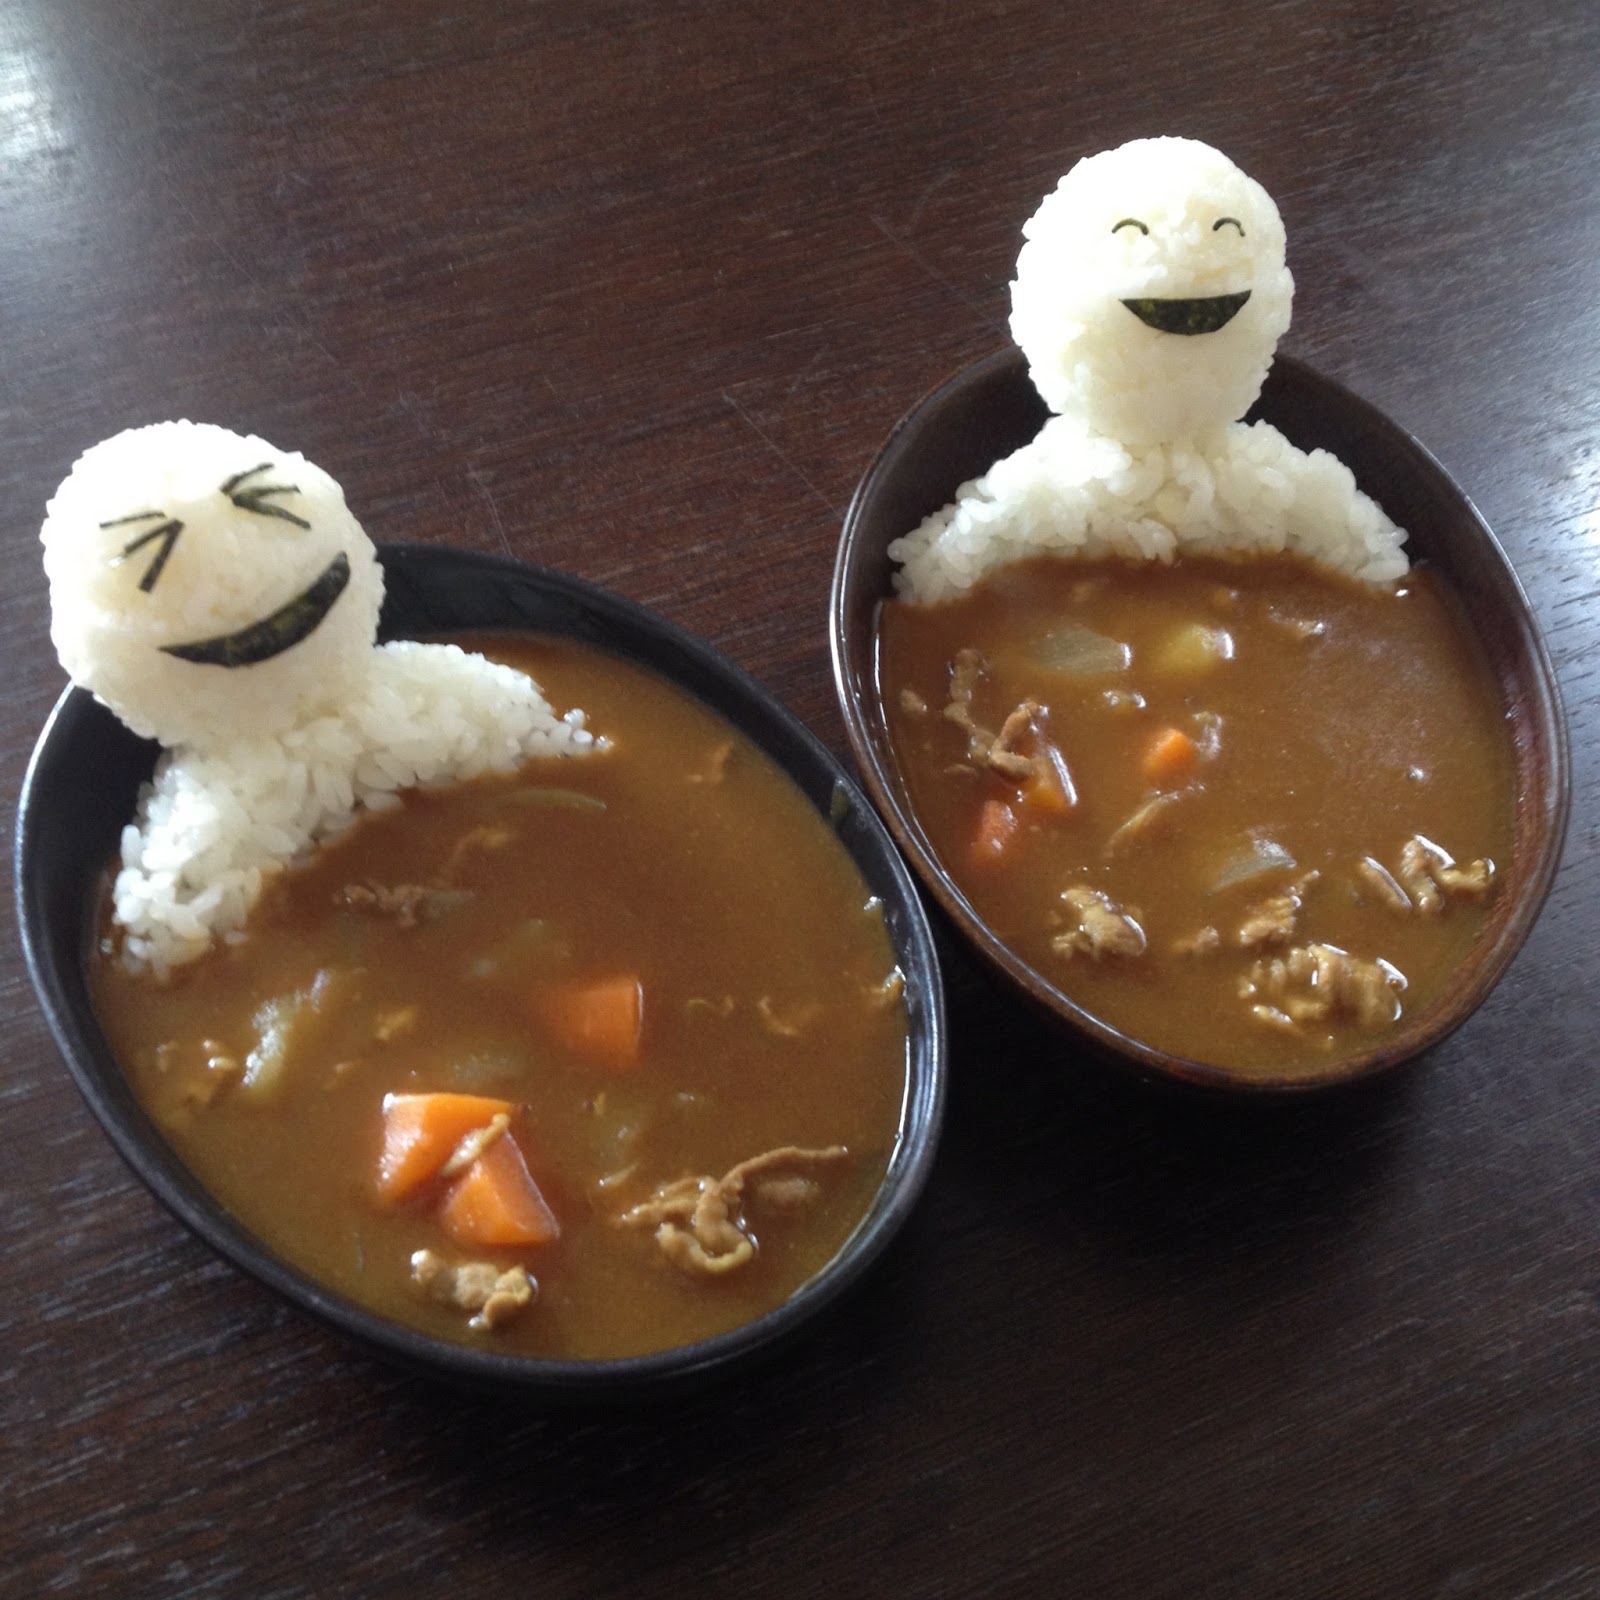 Rice Take hot Bath Funny Food Picture